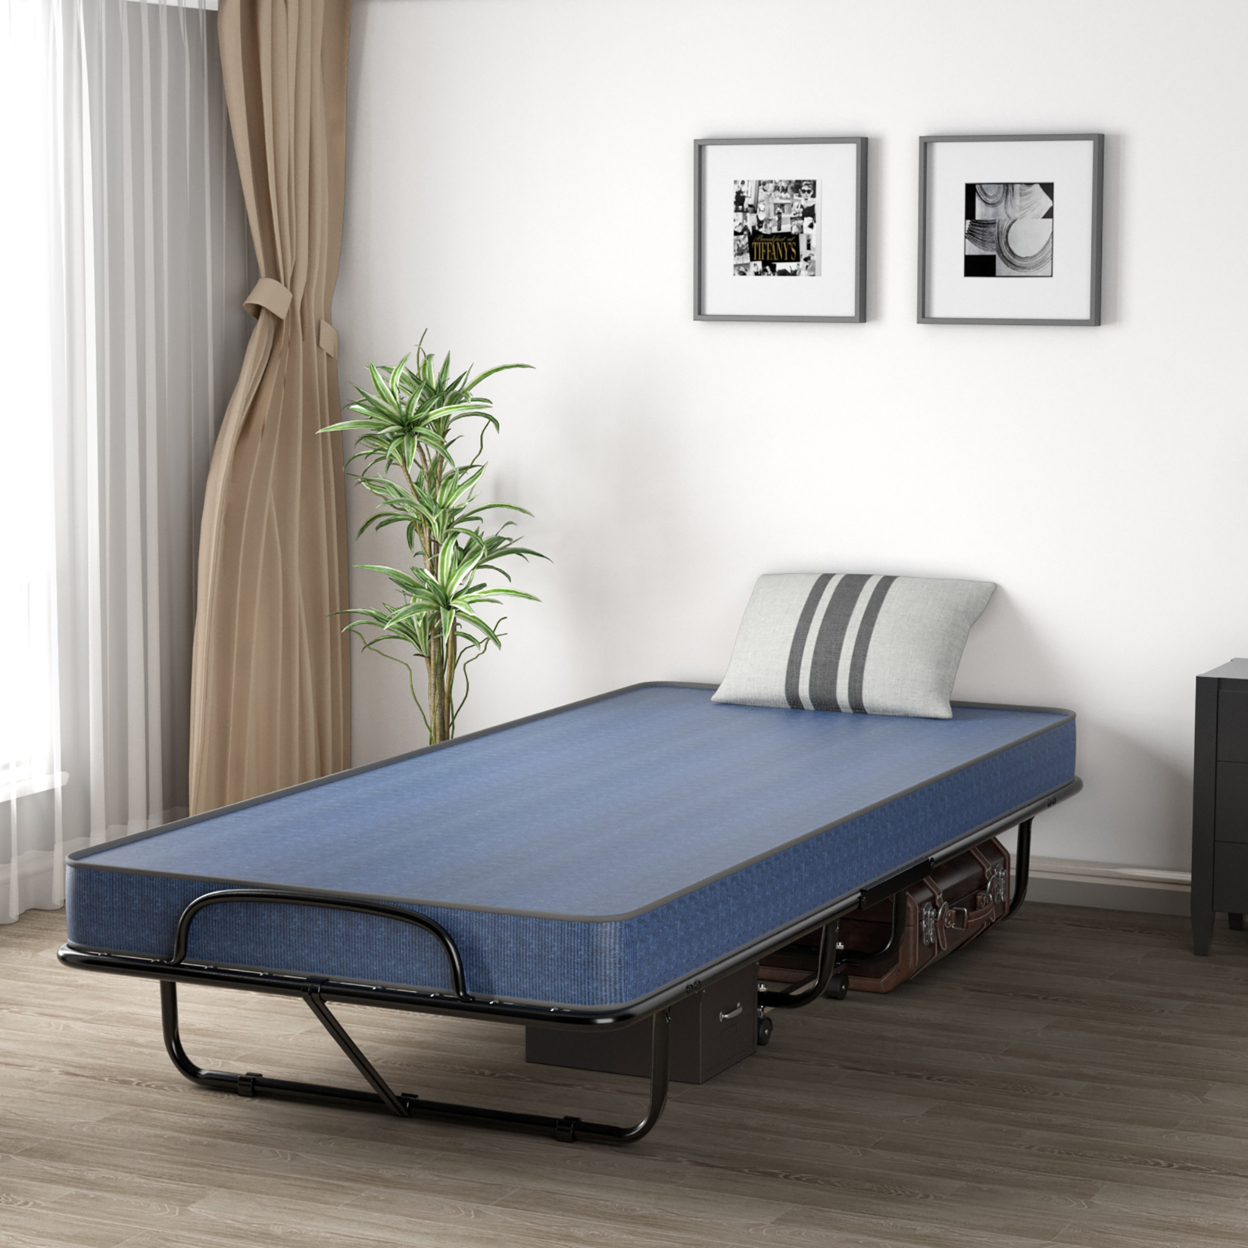 Folding Bed With Mattress Portable Rollaway Guest Cot Memory Foam Made In Italy Navy